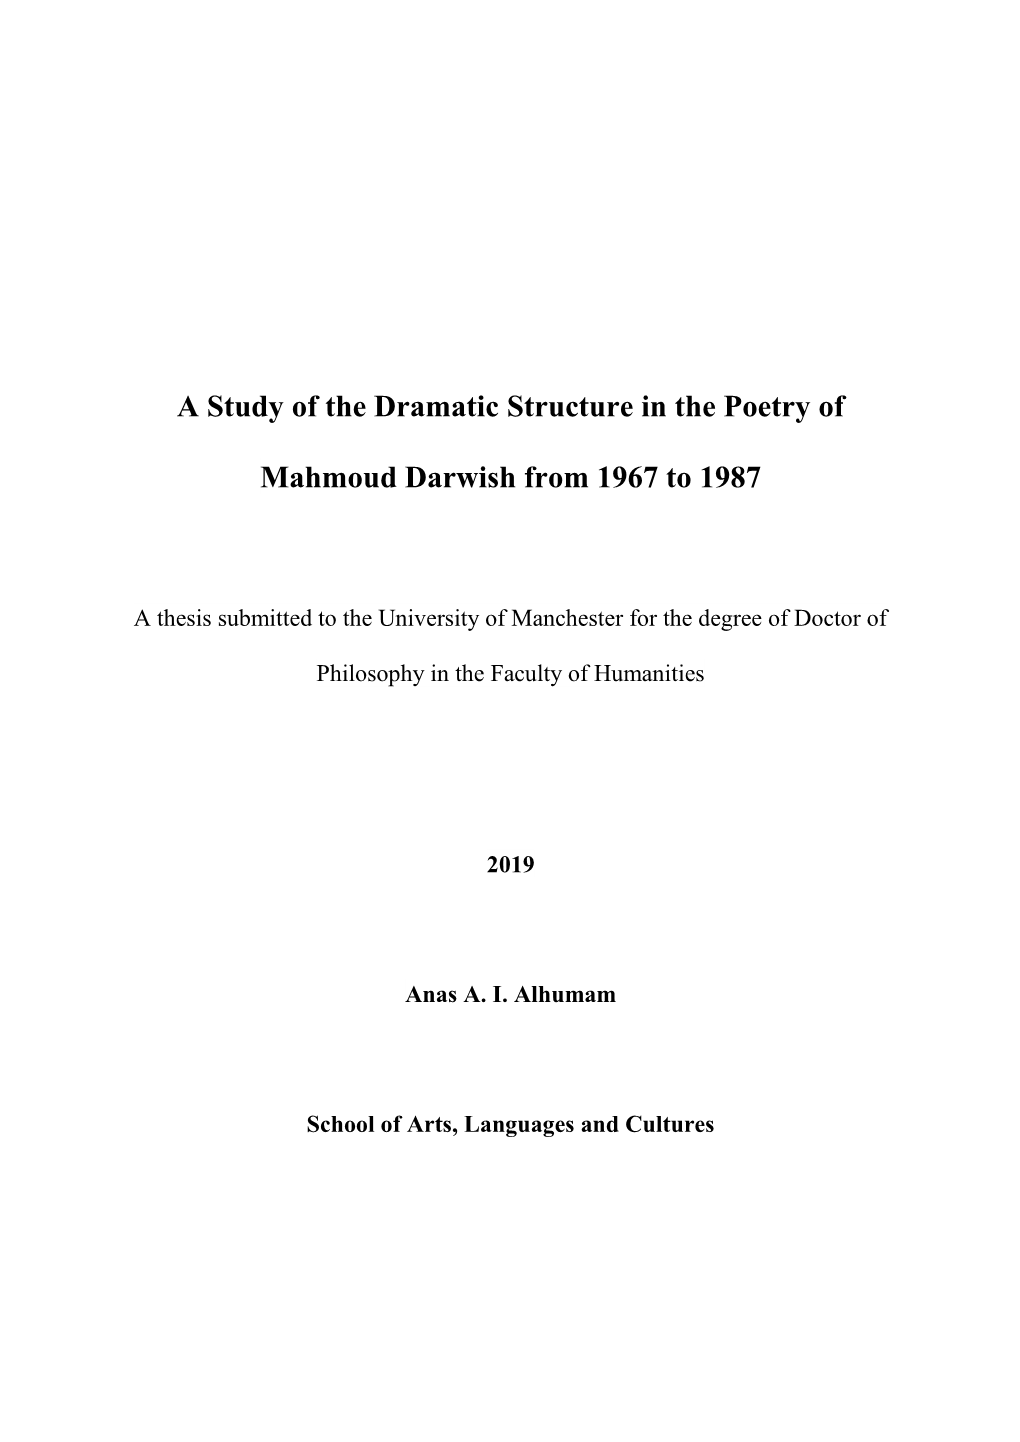 A Study of the Dramatic Structure in the Poetry of Mahmoud Darwish